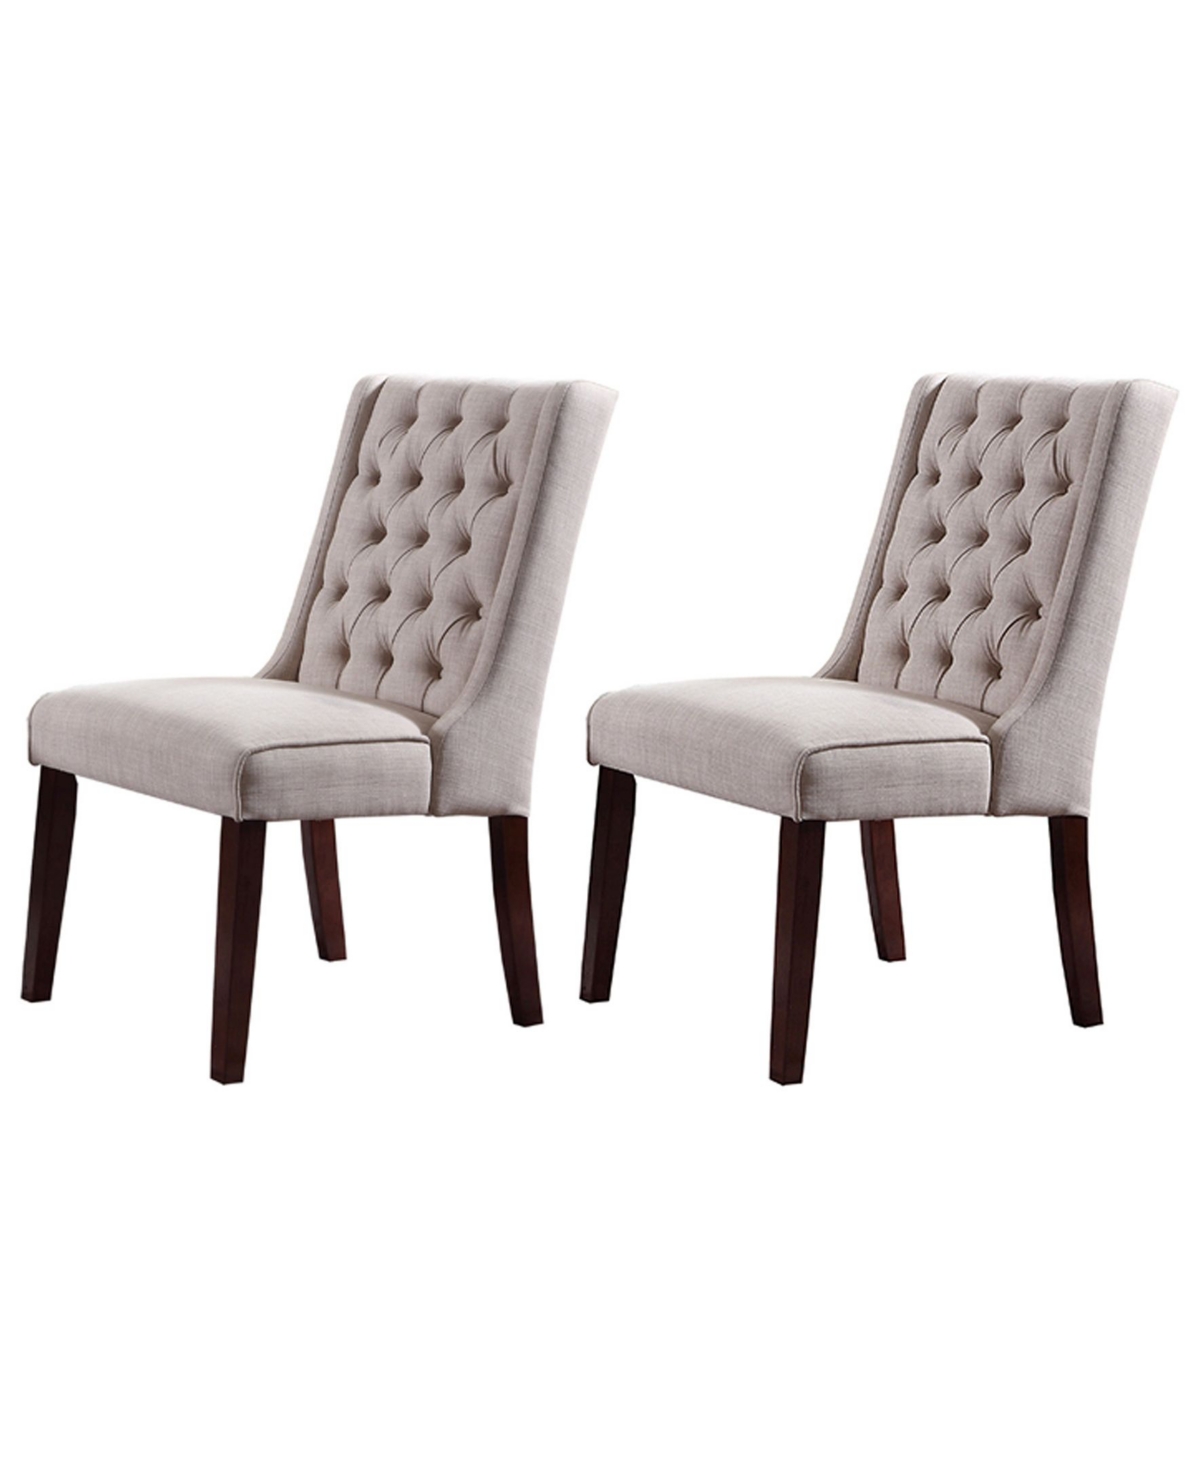 Best Master Furniture Newport Upholstered Side Chairs With Tufted Back, Set Of 2 In Beige